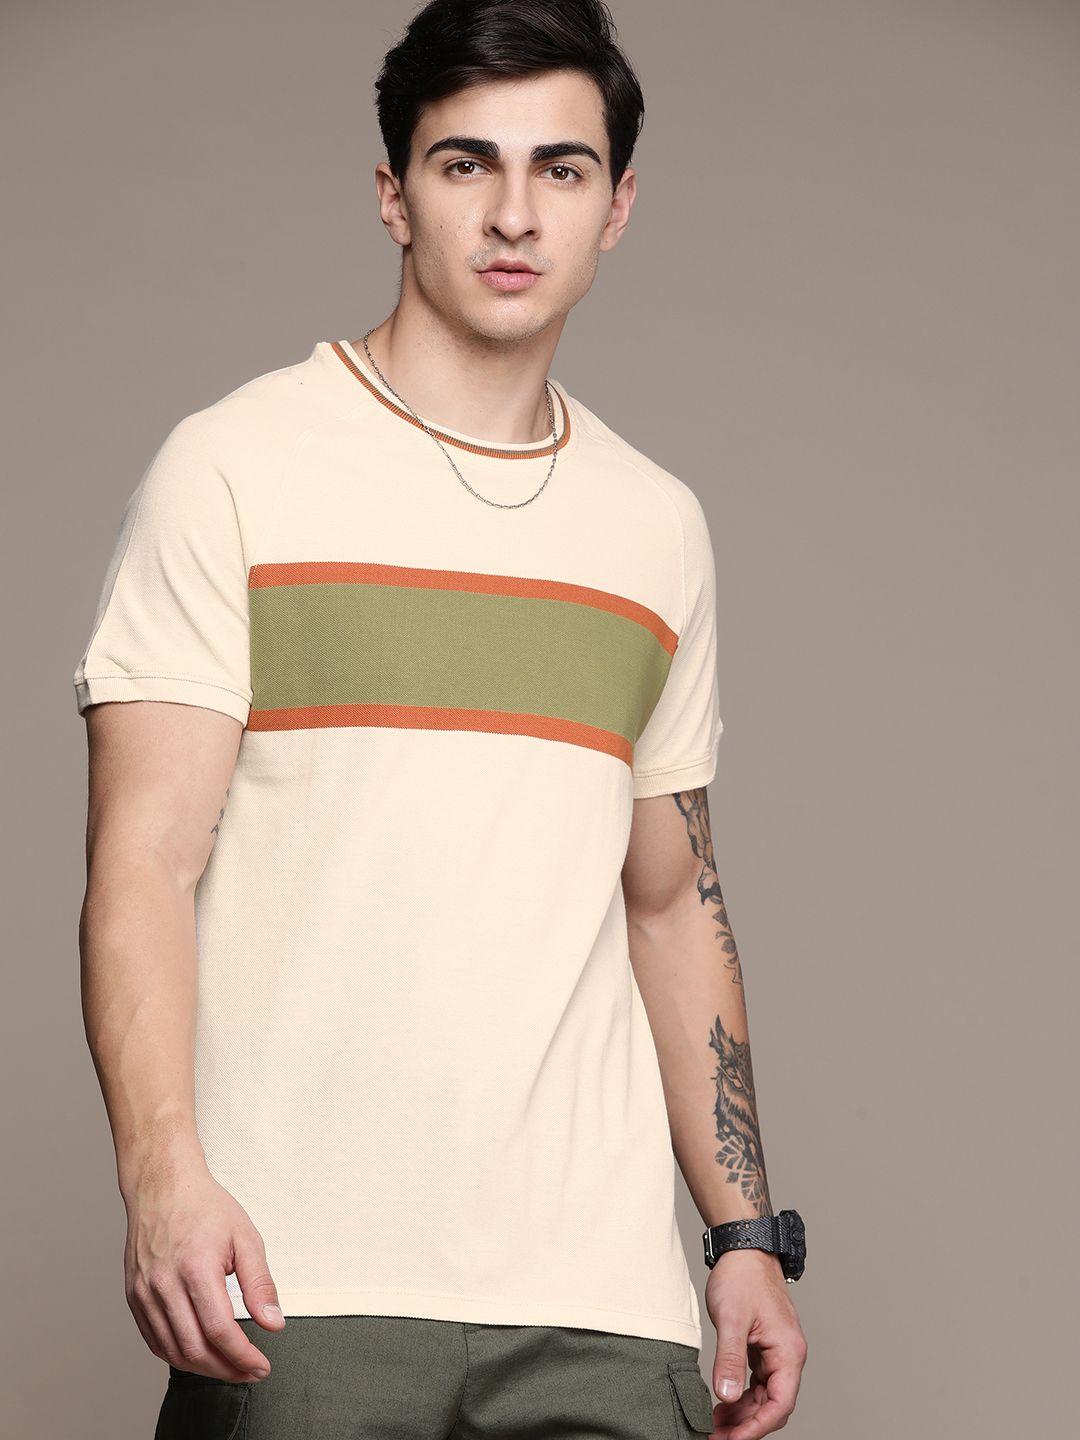 the roadster lifestyle co. striped pure cotton t-shirt